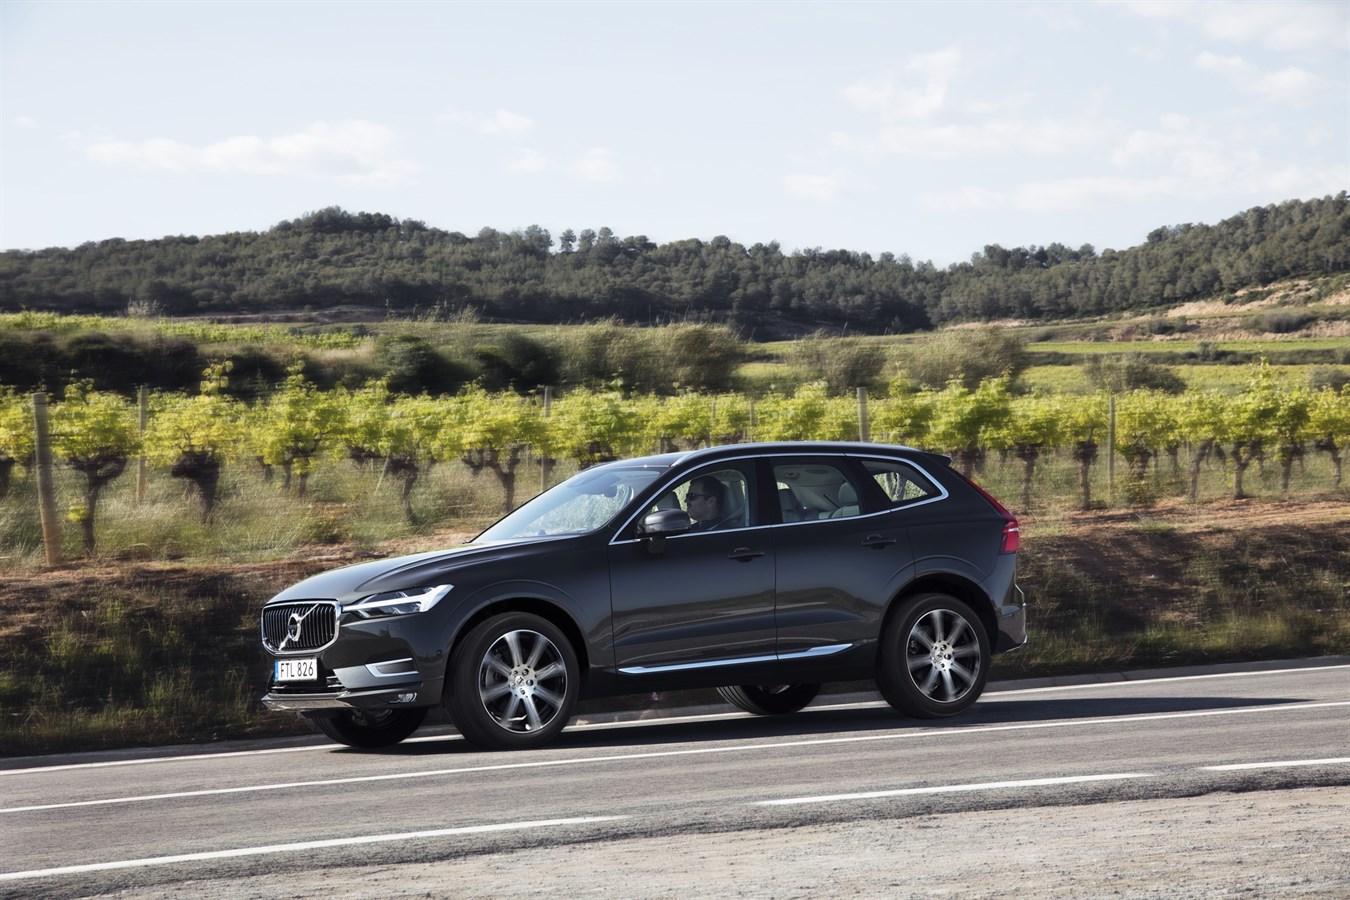 The new Volvo XC60 D5